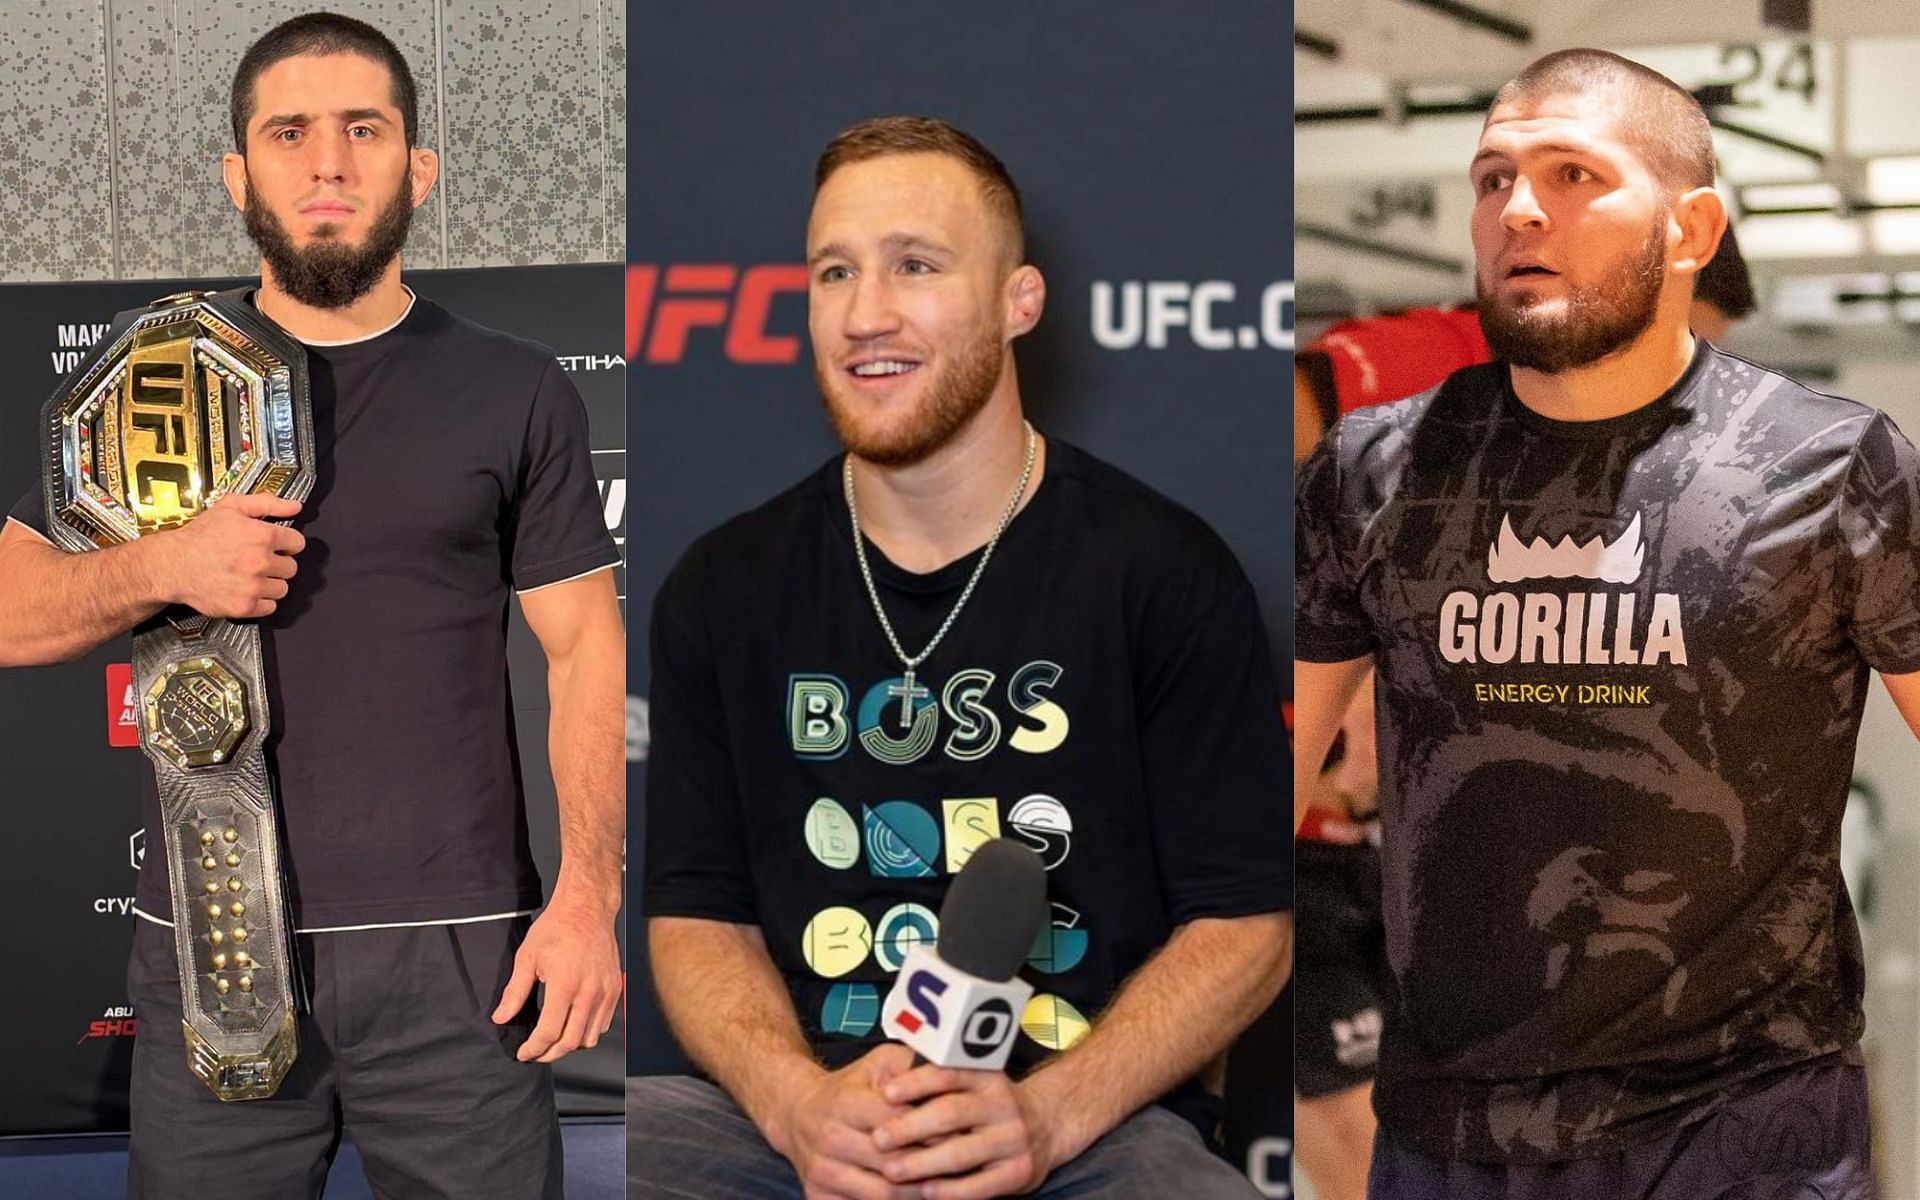 Justin Gaethje (center) reflects on his previous statement comparing Islam Makhachev (left) to Khabib Nurmagomedov (right) [Photo Courtesy @Justin_gaethje, @islam_makhachev and @khabib_nurmagomedov on Instagram]